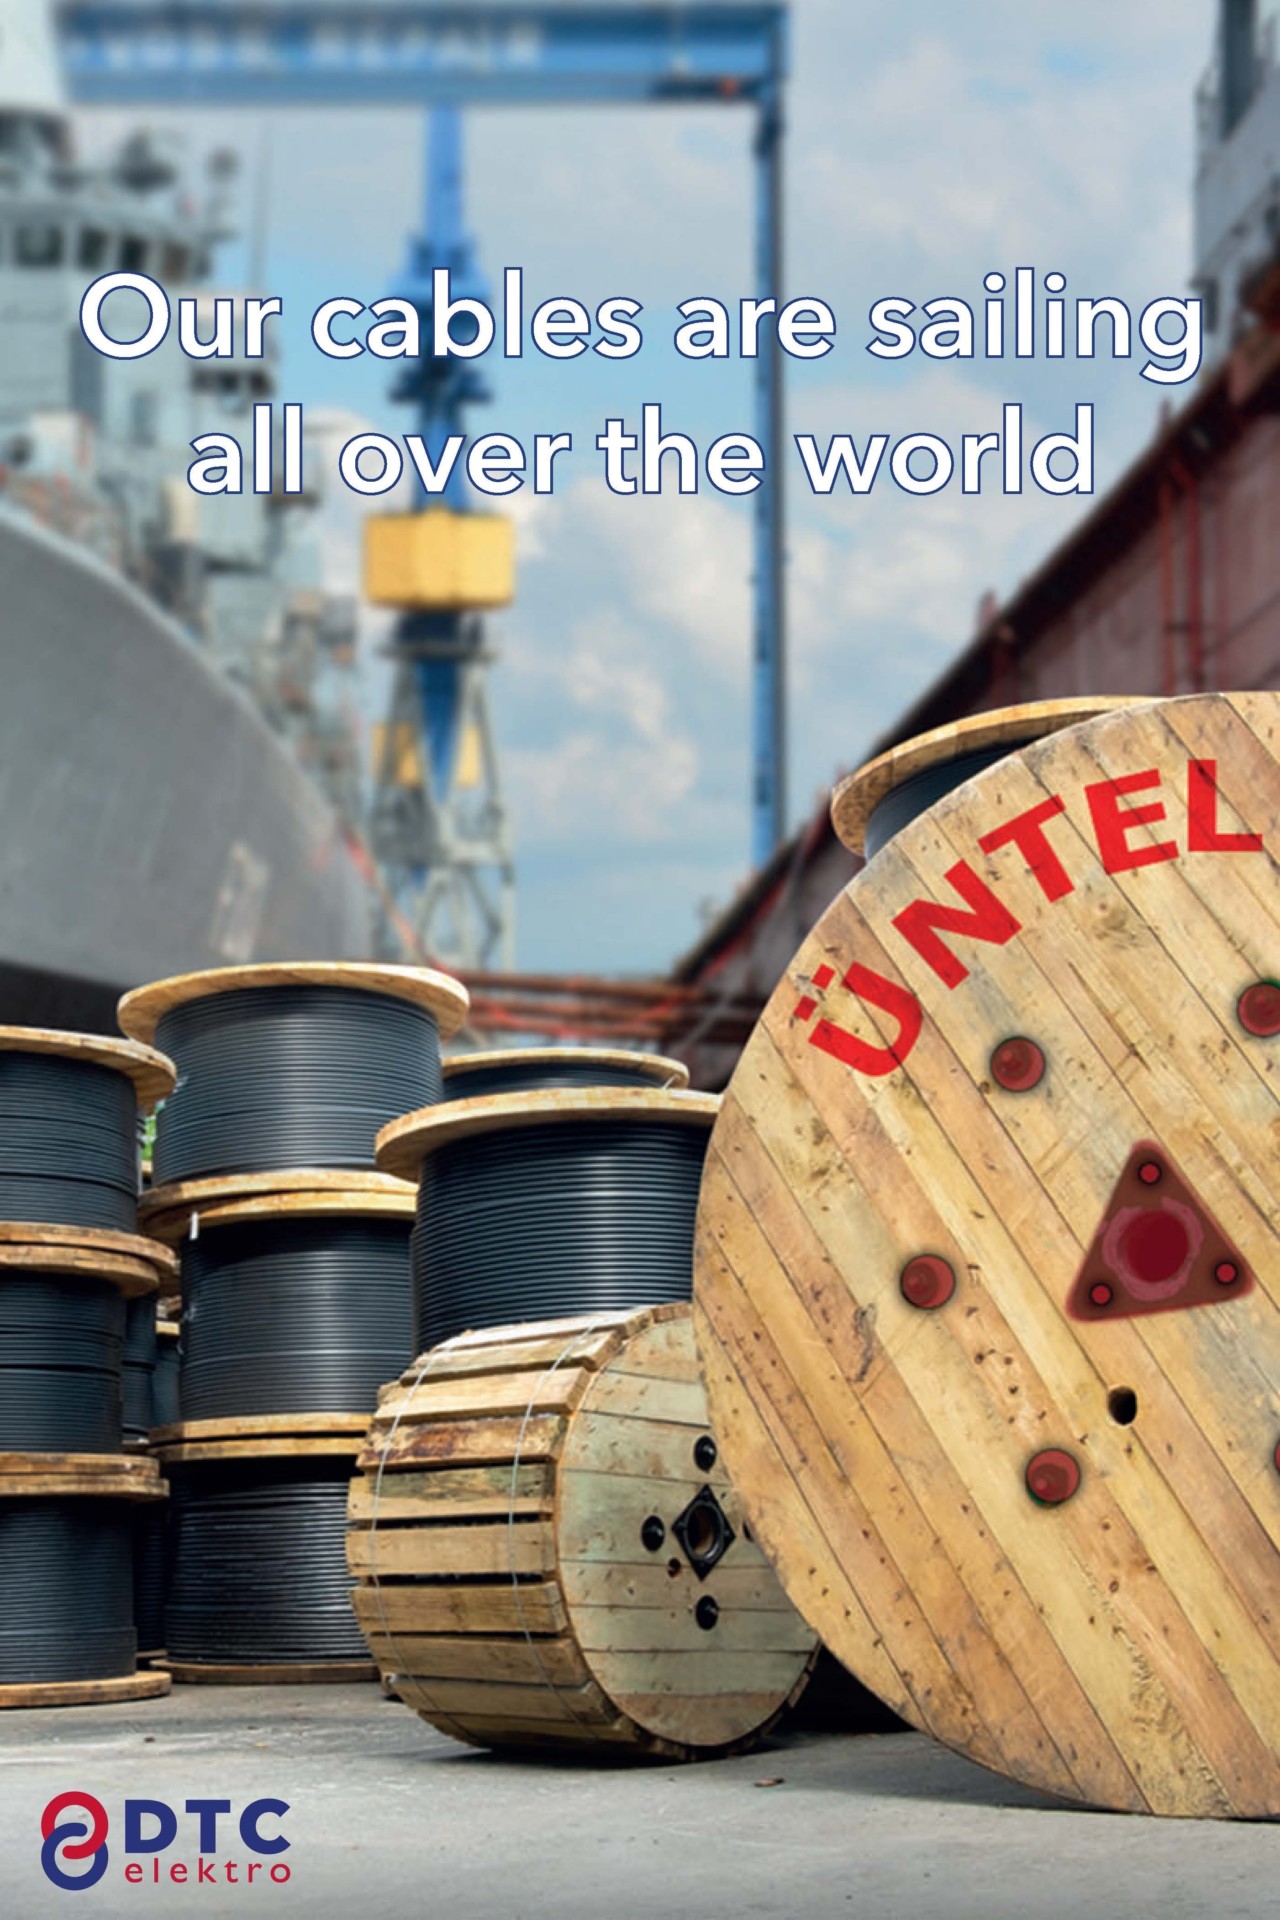 Our-cables-sailinga-ll-over-the-world